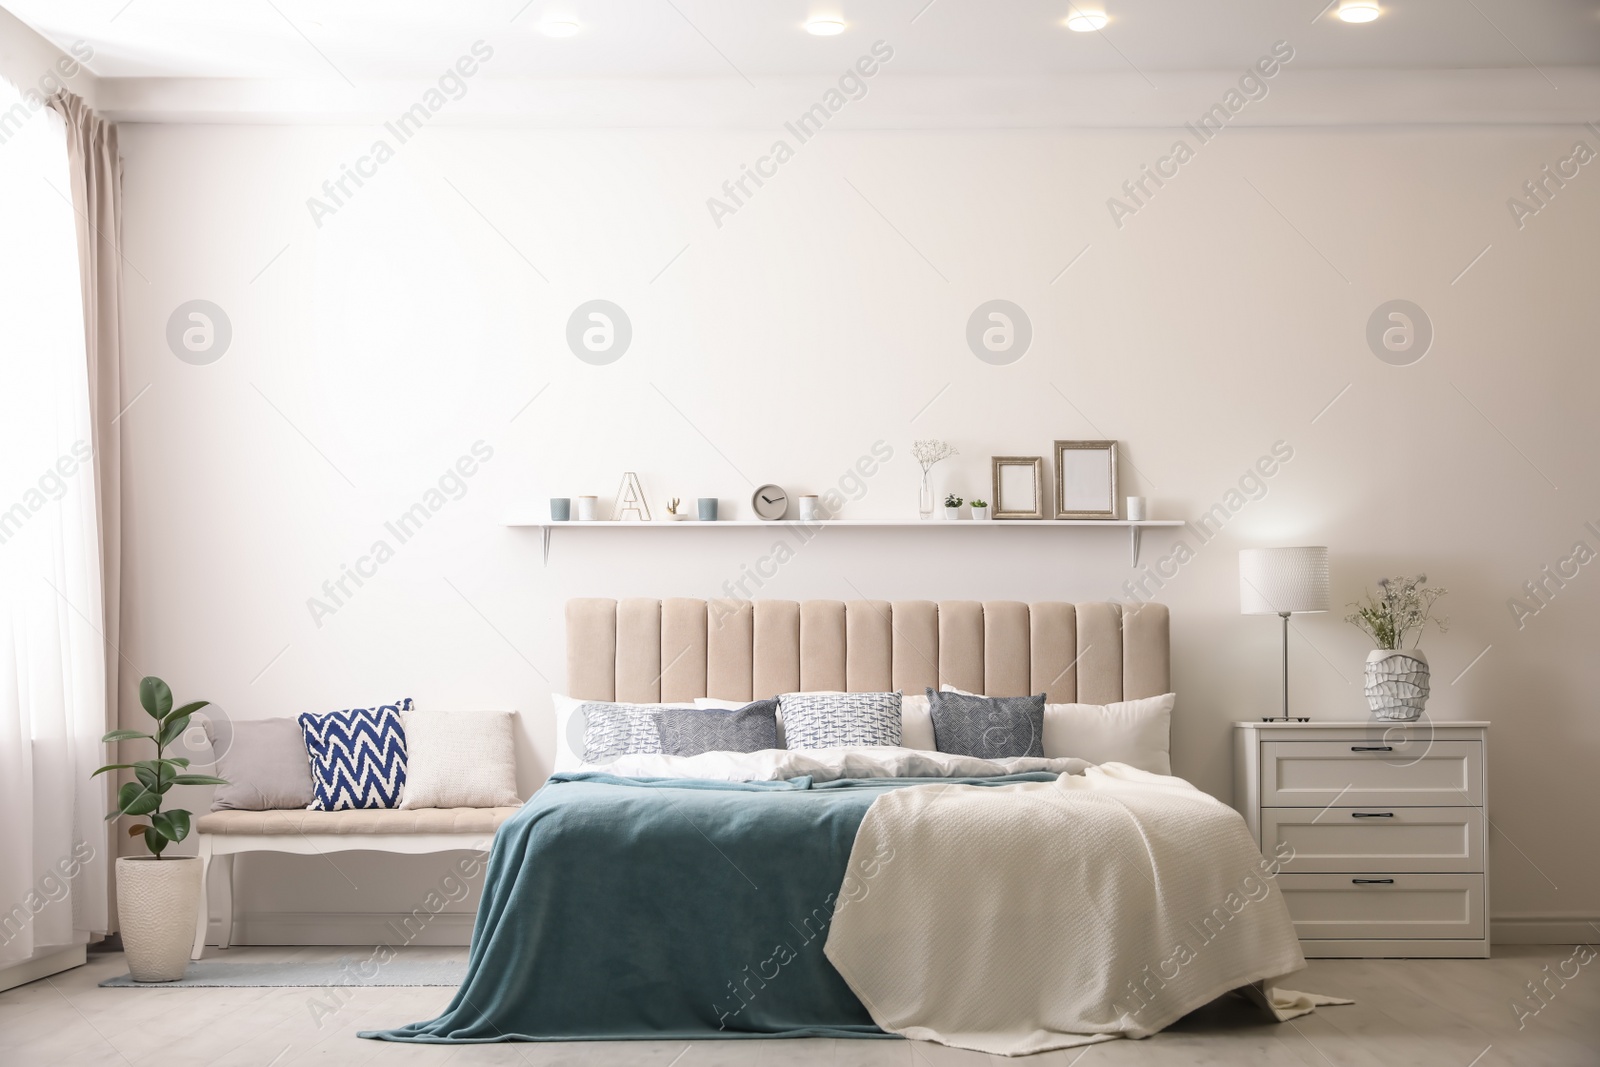 Photo of Comfortable bed with pillows in room. Stylish interior design